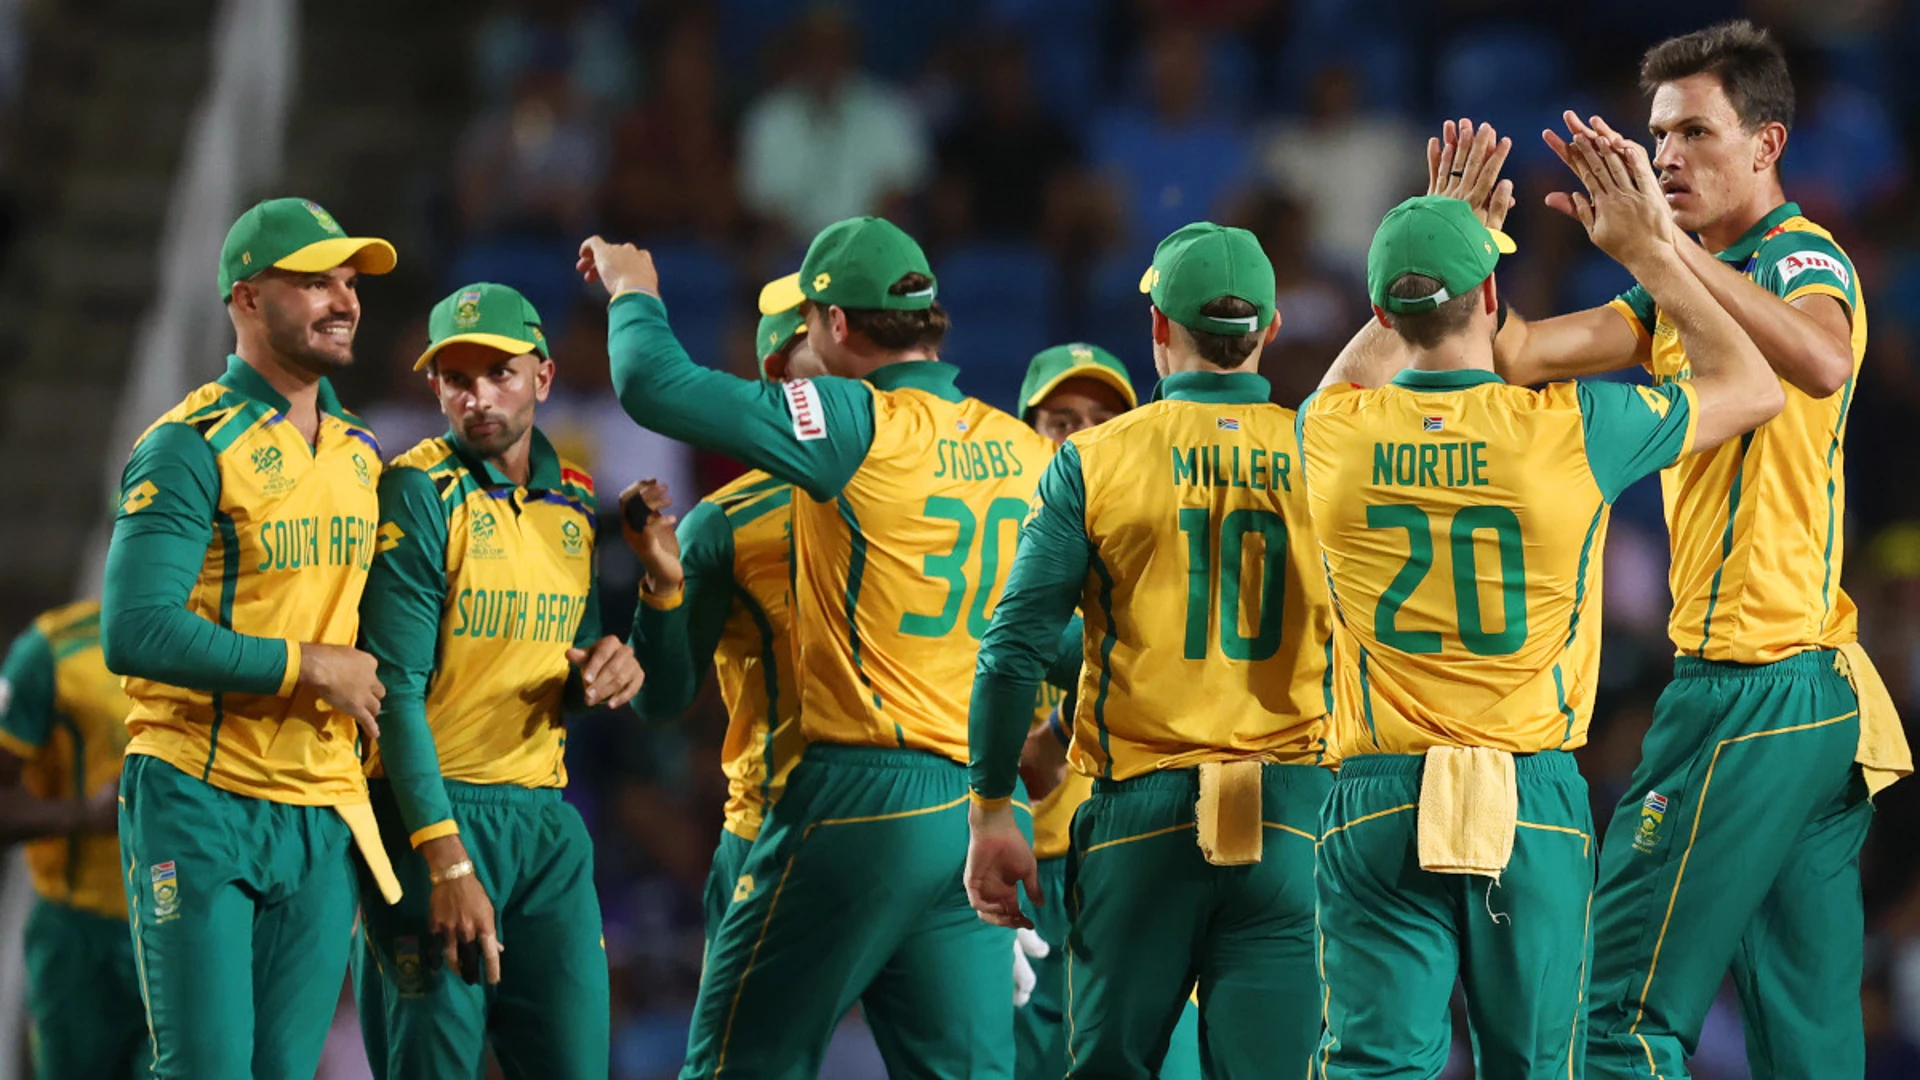 SuperSport and SABC reach agreement to televise ICC T20 Men’s World Cup Final and Boks inbound tests